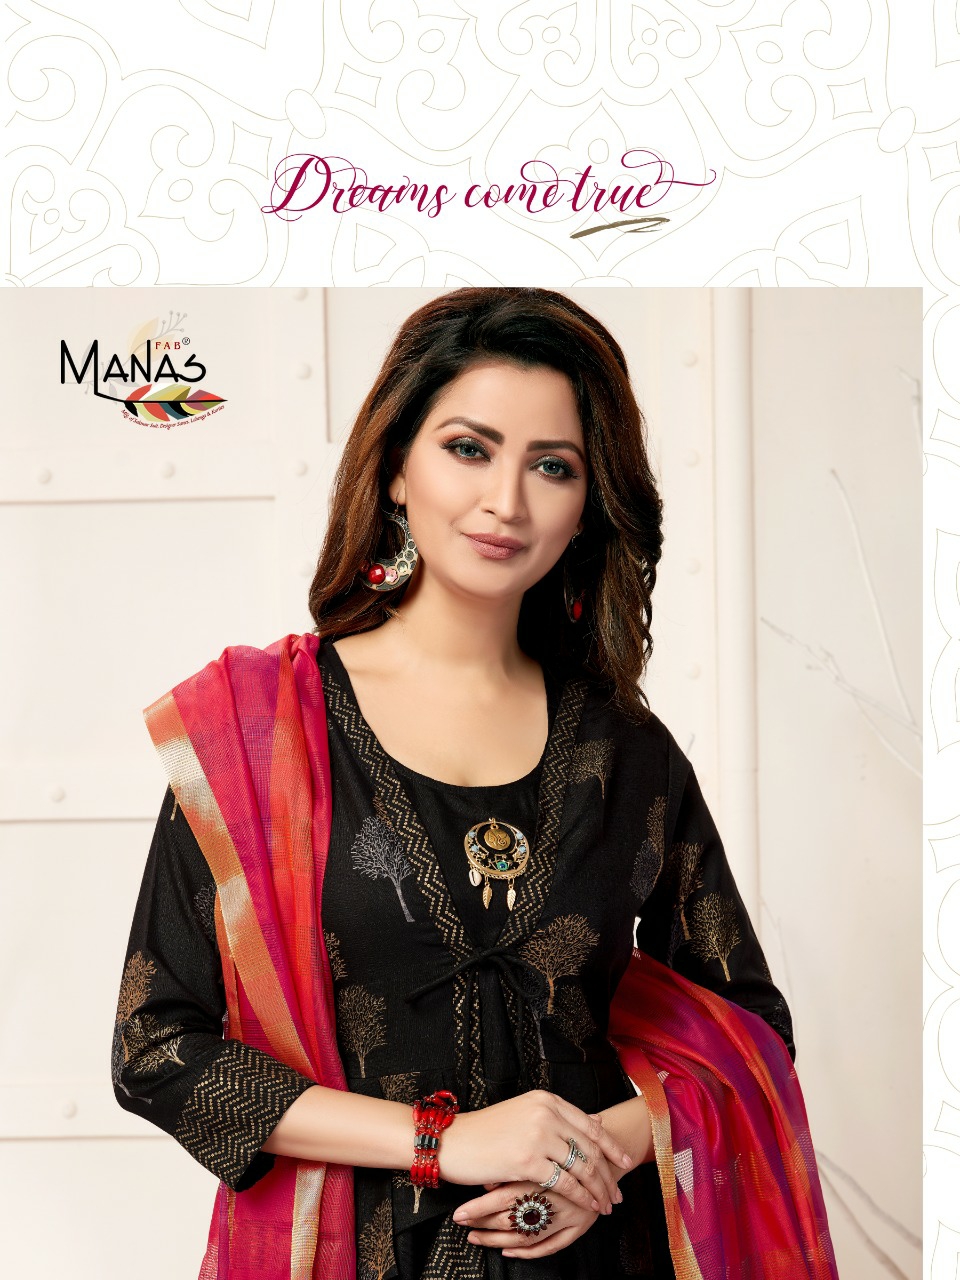 Manas Presents Kaira Vol-3 Beautiful Designer Gown Style Kurtis With Dupatta Collection At Wholesale